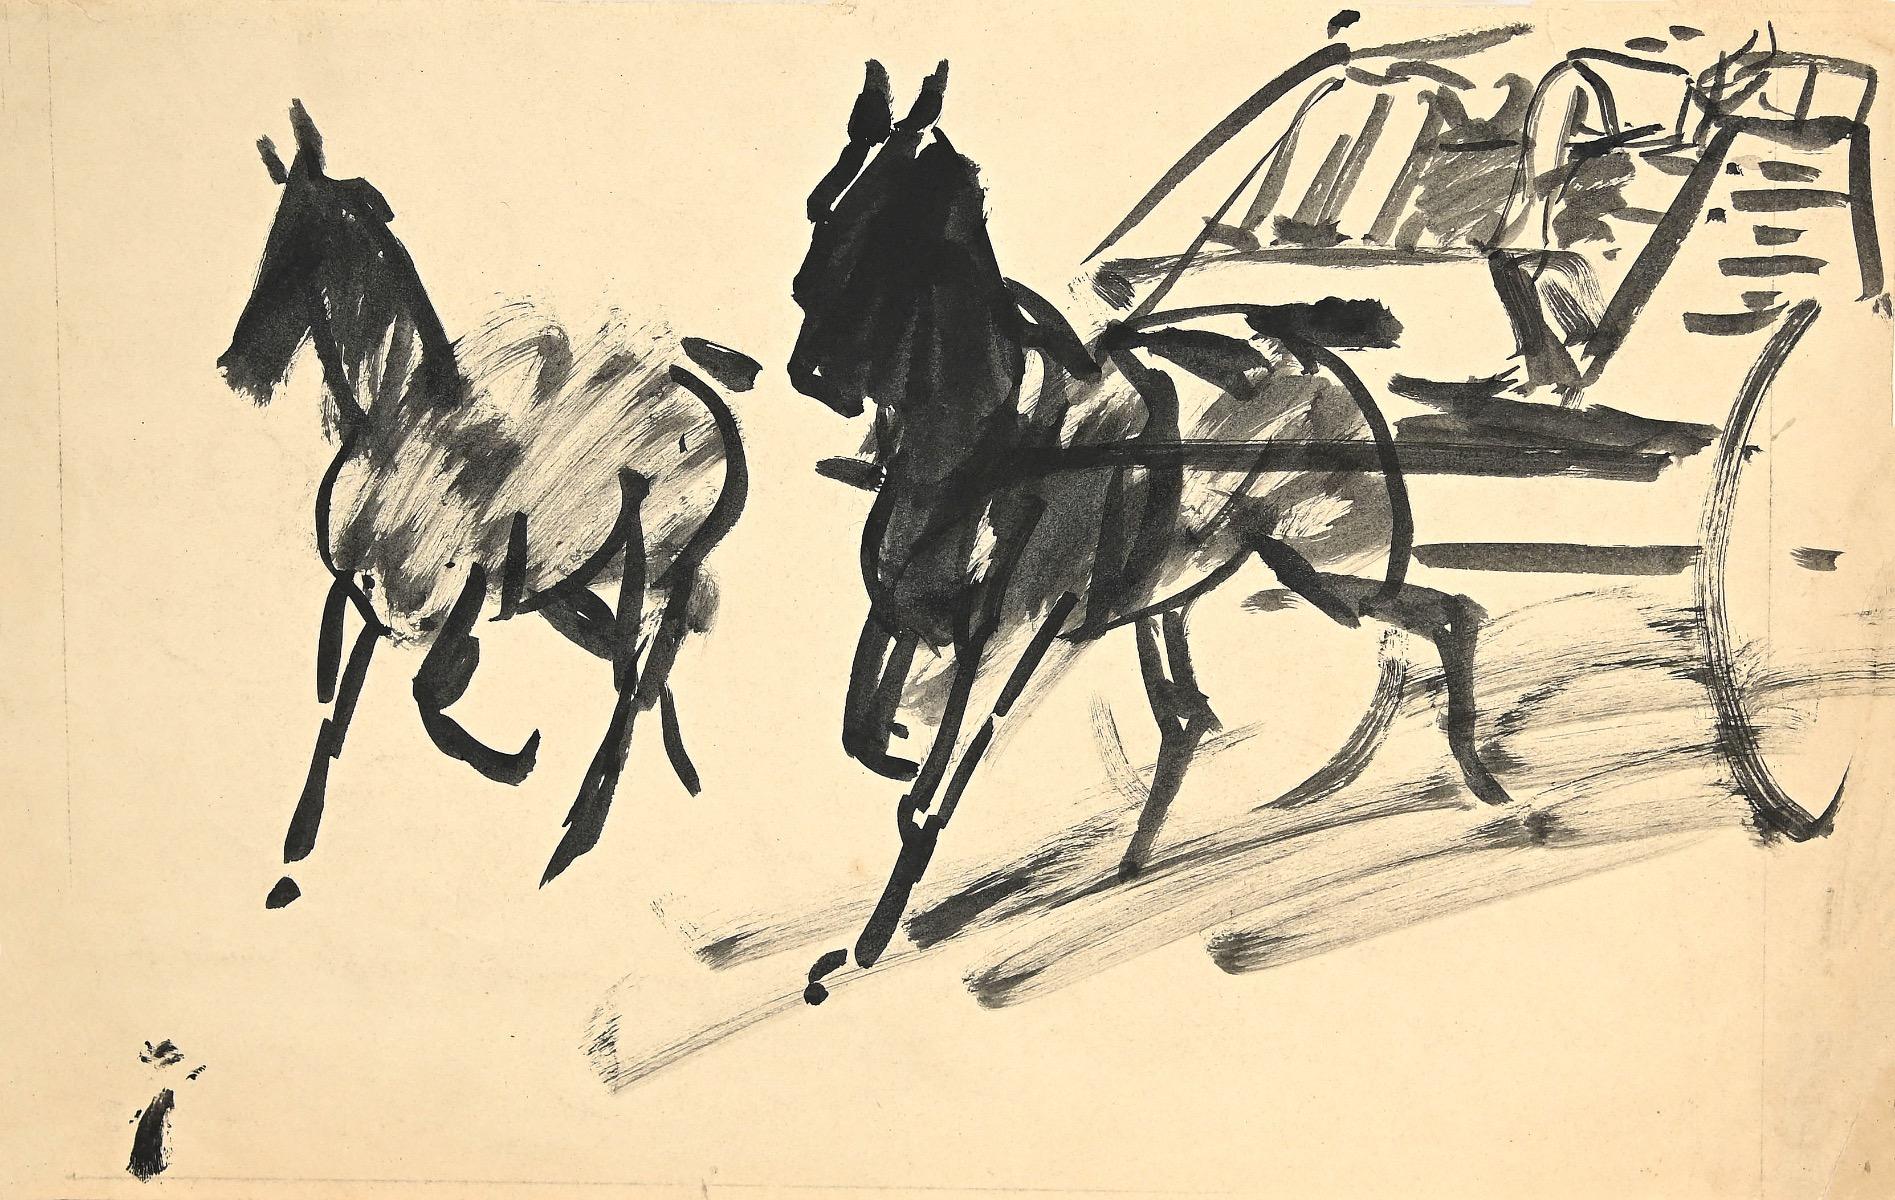 Unknown Animal Art - Horses and Carriage - China Ink and Watercolor - 1940s